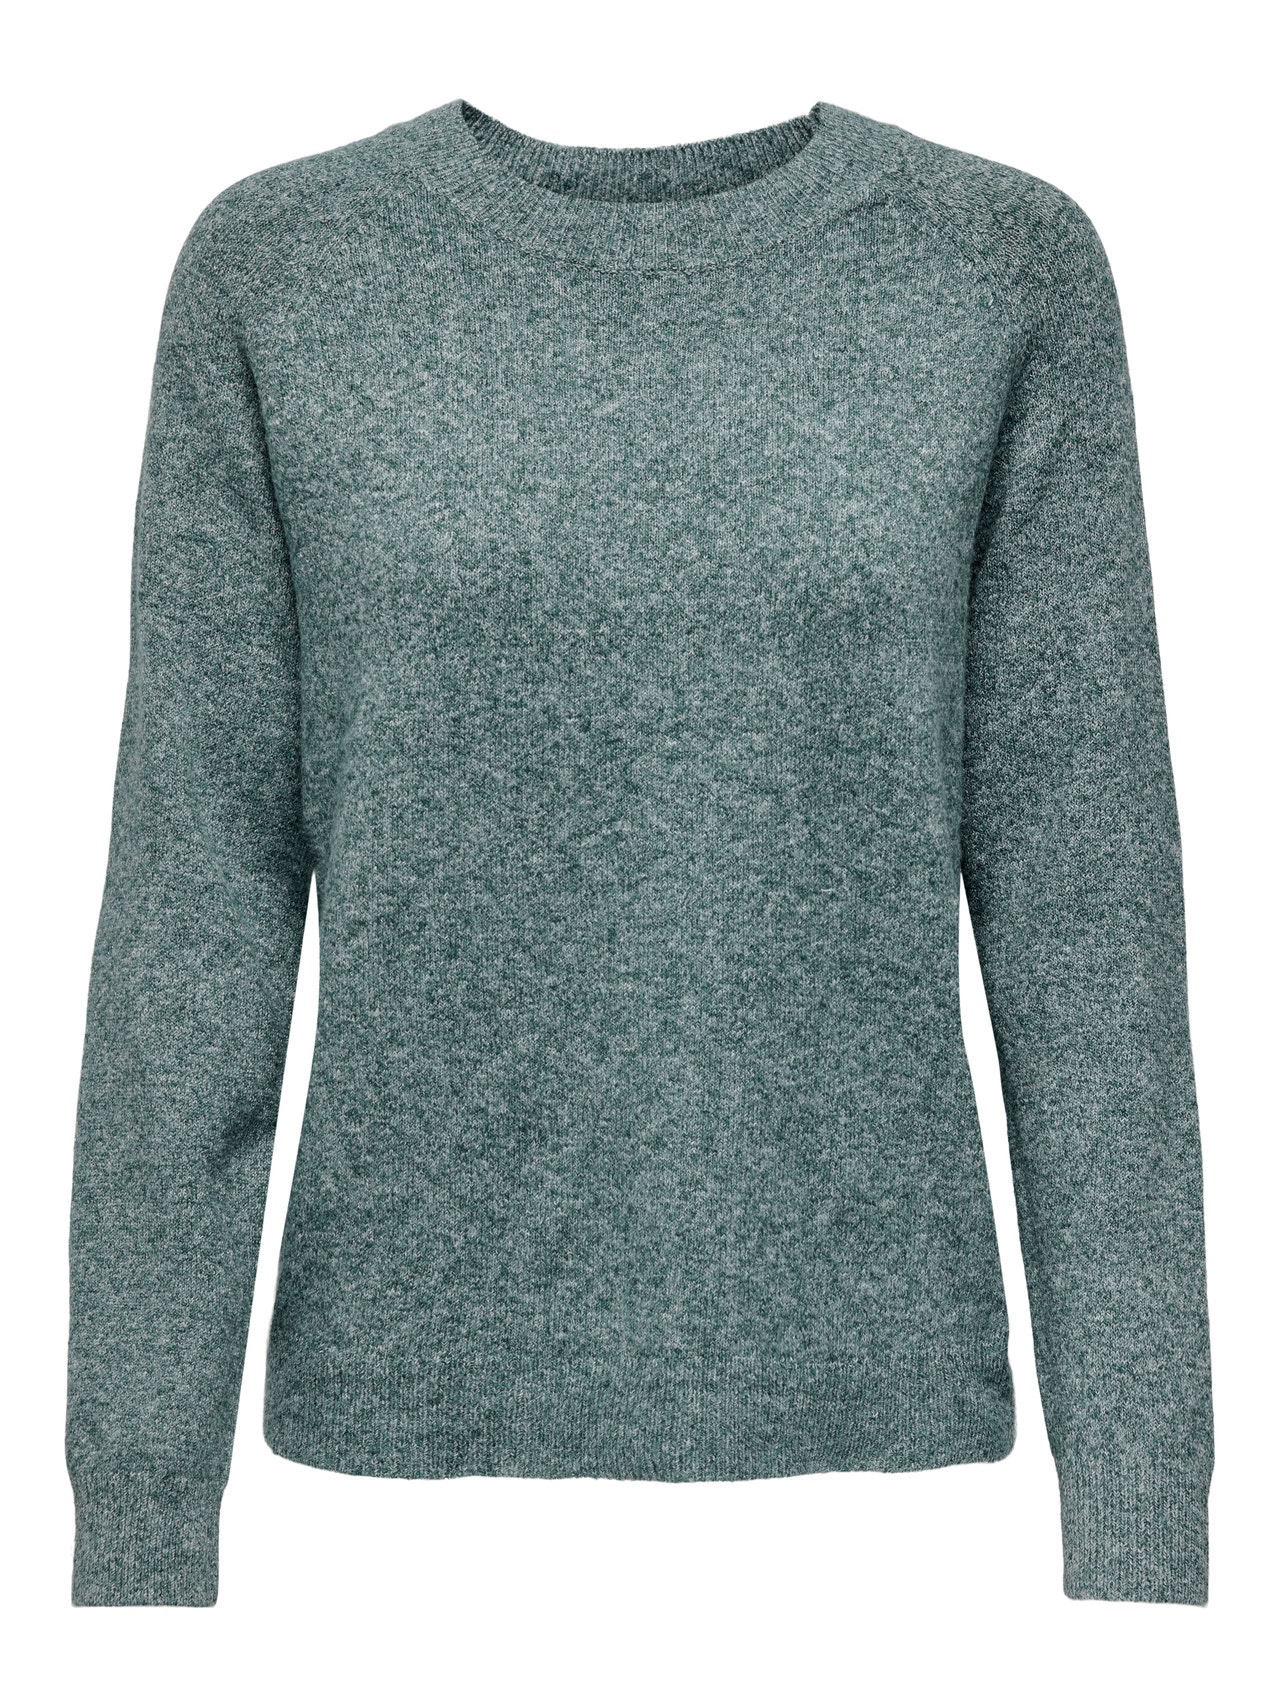 ONLY Einfarbiger Strickpullover -Sea Moss - 15204279